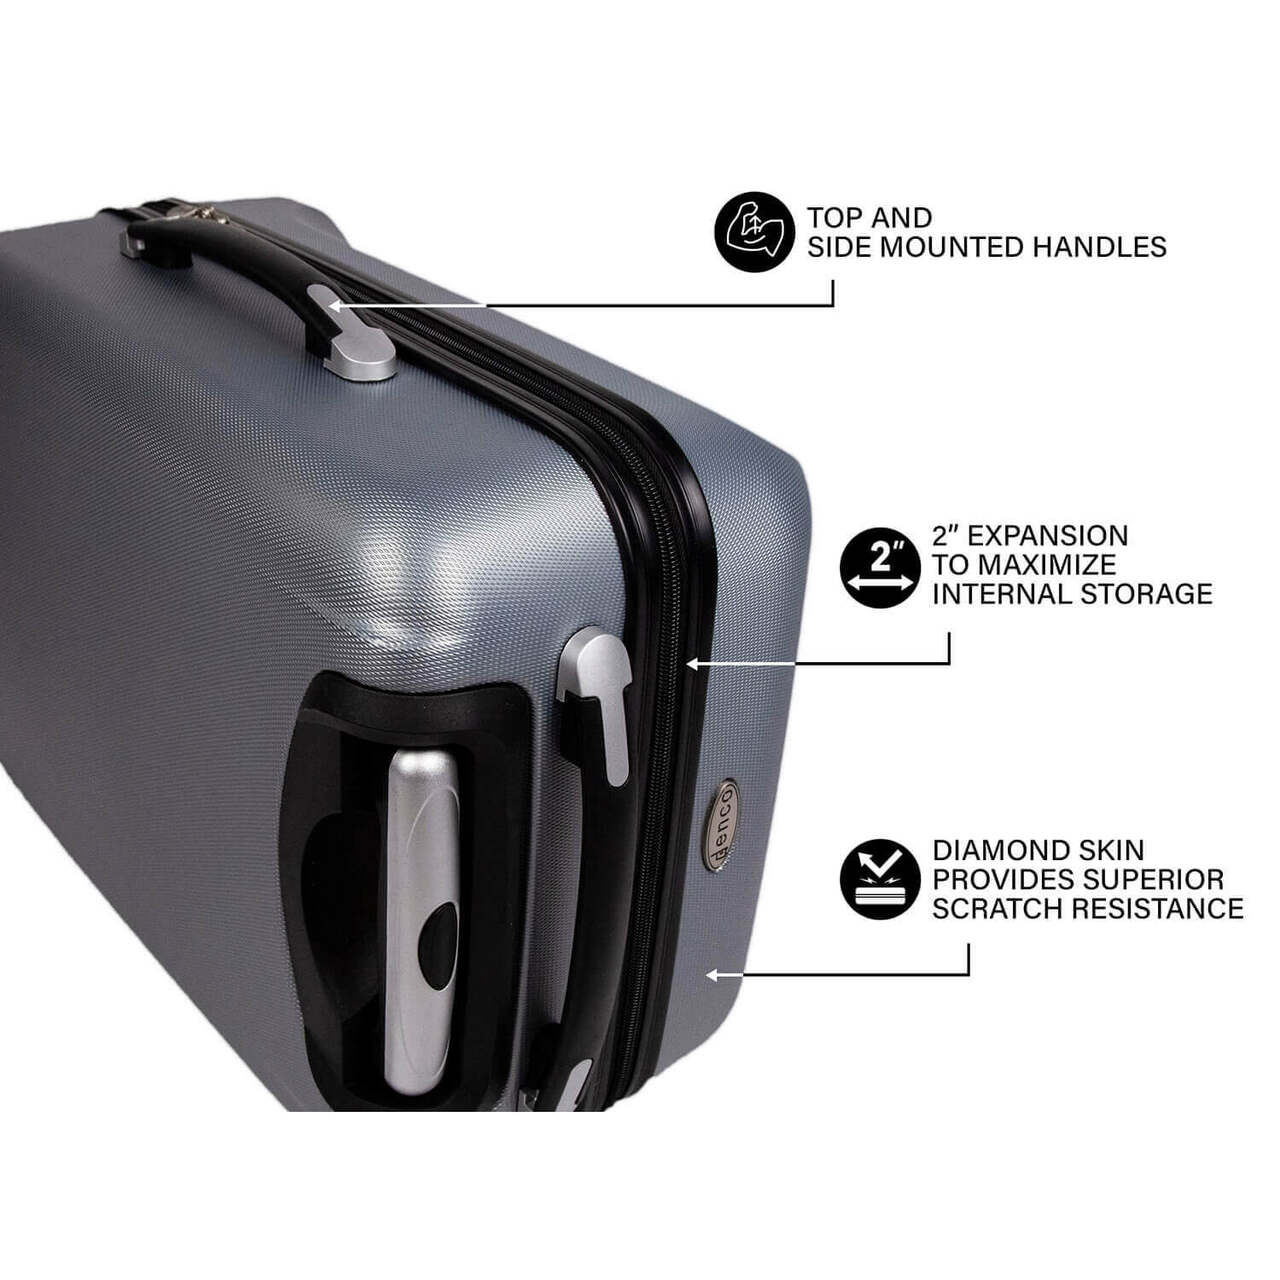 Cleveland Browns 20" Silver Domestic Carry-on Spinner